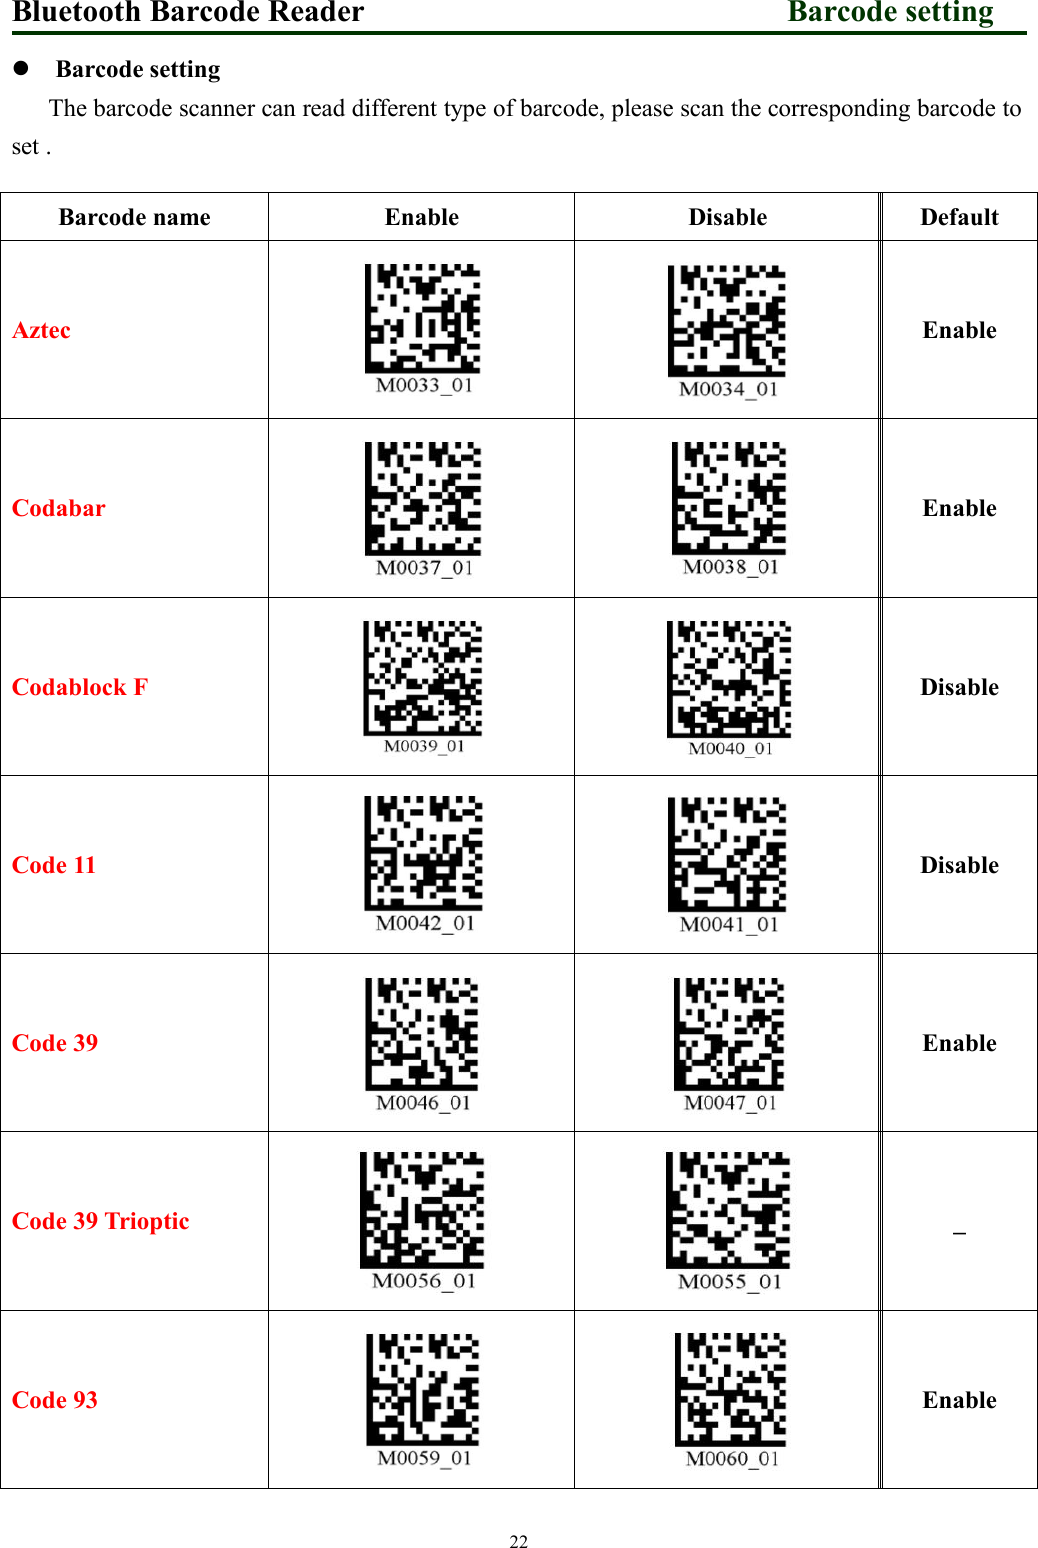 Bluetooth Barcode Reader Barcode setting22Barcode settingThe barcode scanner can read different type of barcode, please scan the corresponding barcode toset .Barcode nameEnableDisableDefaultAztecEnableCodabarEnableCodablock FDisableCode 11DisableCode 39EnableCode 39 Trioptic_Code 93Enable